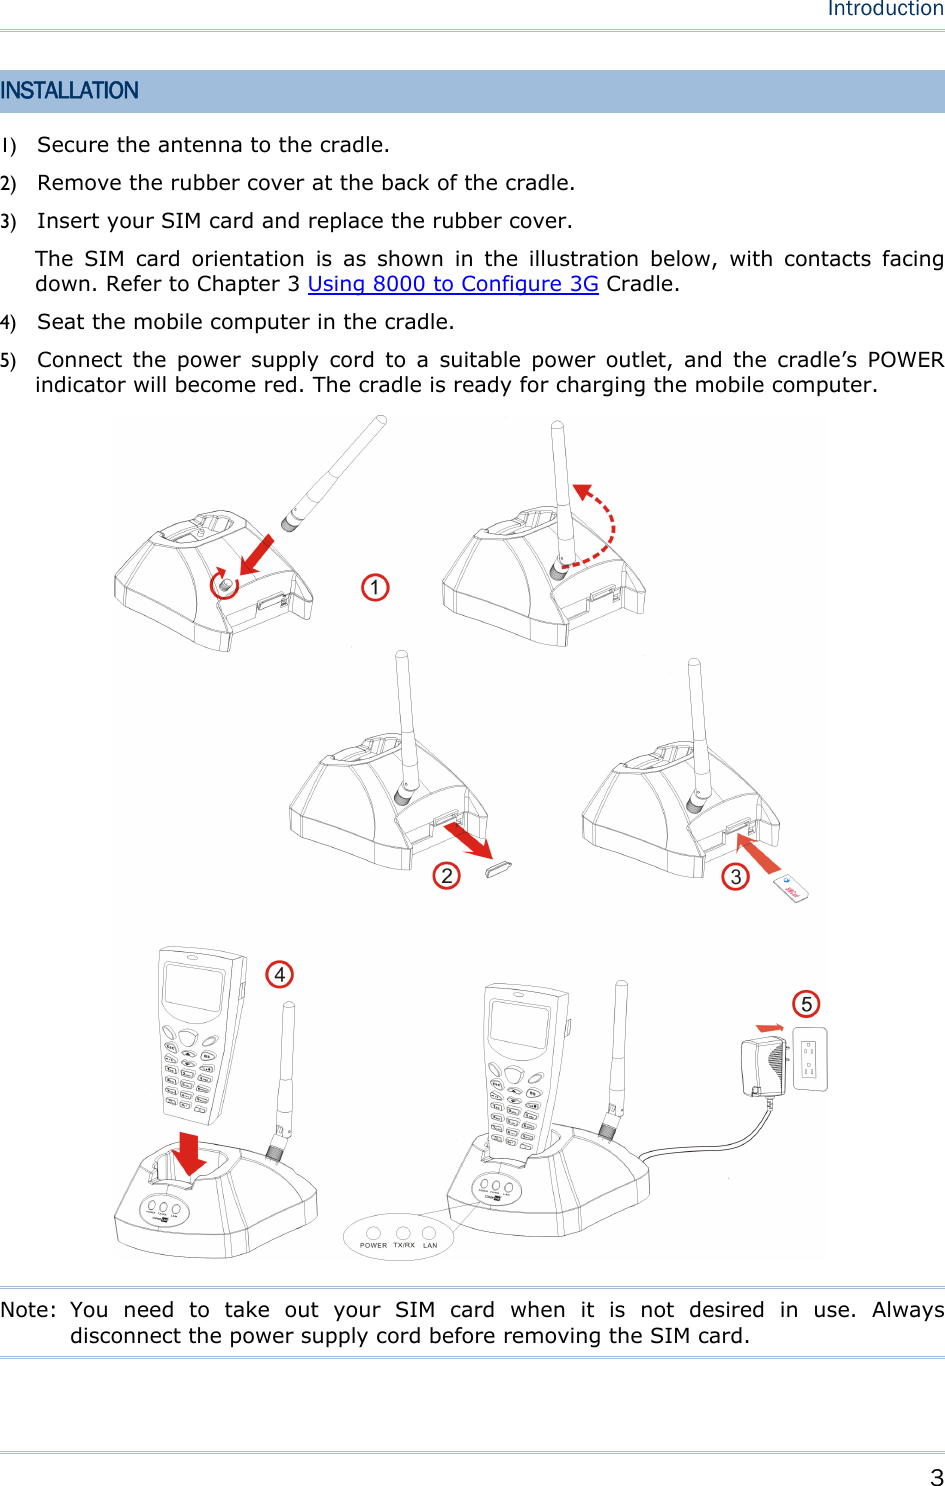     3   Introduction  INSTALLATION 1) Secure the antenna to the cradle. 2) Remove the rubber cover at the back of the cradle. 3) Insert your SIM card and replace the rubber cover. The SIM card orientation is as shown in the illustration below, with contacts facing down. Refer to Chapter 3 Using 8000 to Configure 3G Cradle. 4) Seat the mobile computer in the cradle. 5) Connect the power supply cord to a suitable power outlet, and the cradle’s POWER indicator will become red. The cradle is ready for charging the mobile computer.              Note: You need to take out your SIM card when it is not desired in use. Always disconnect the power supply cord before removing the SIM card.   